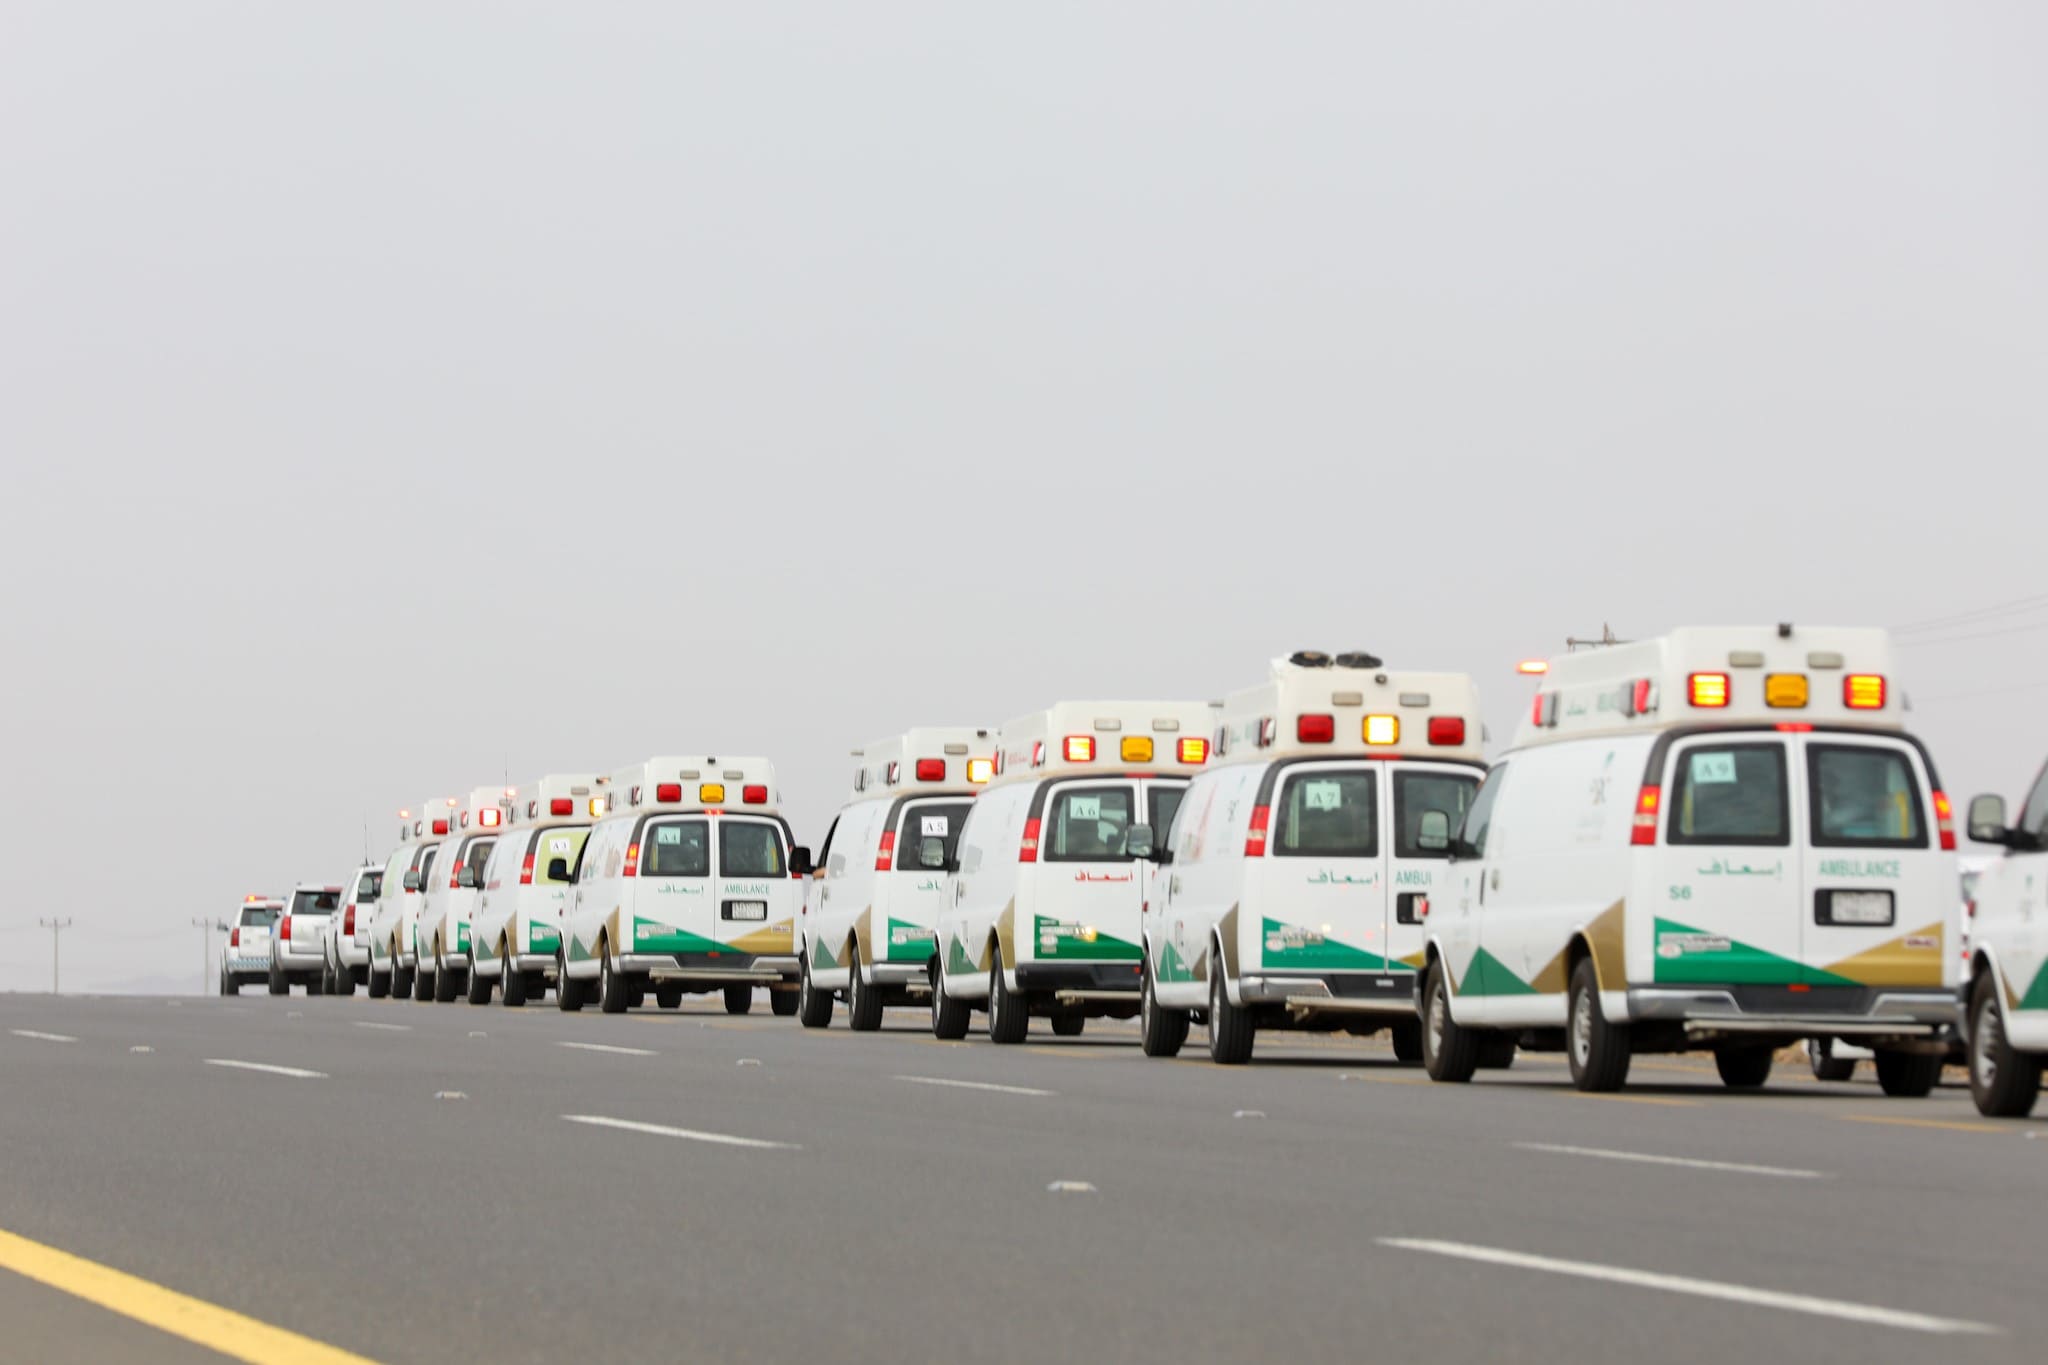 MOH Transfers Groups of Pilgrims who are Hospitalized in Medina to the Holy Sites